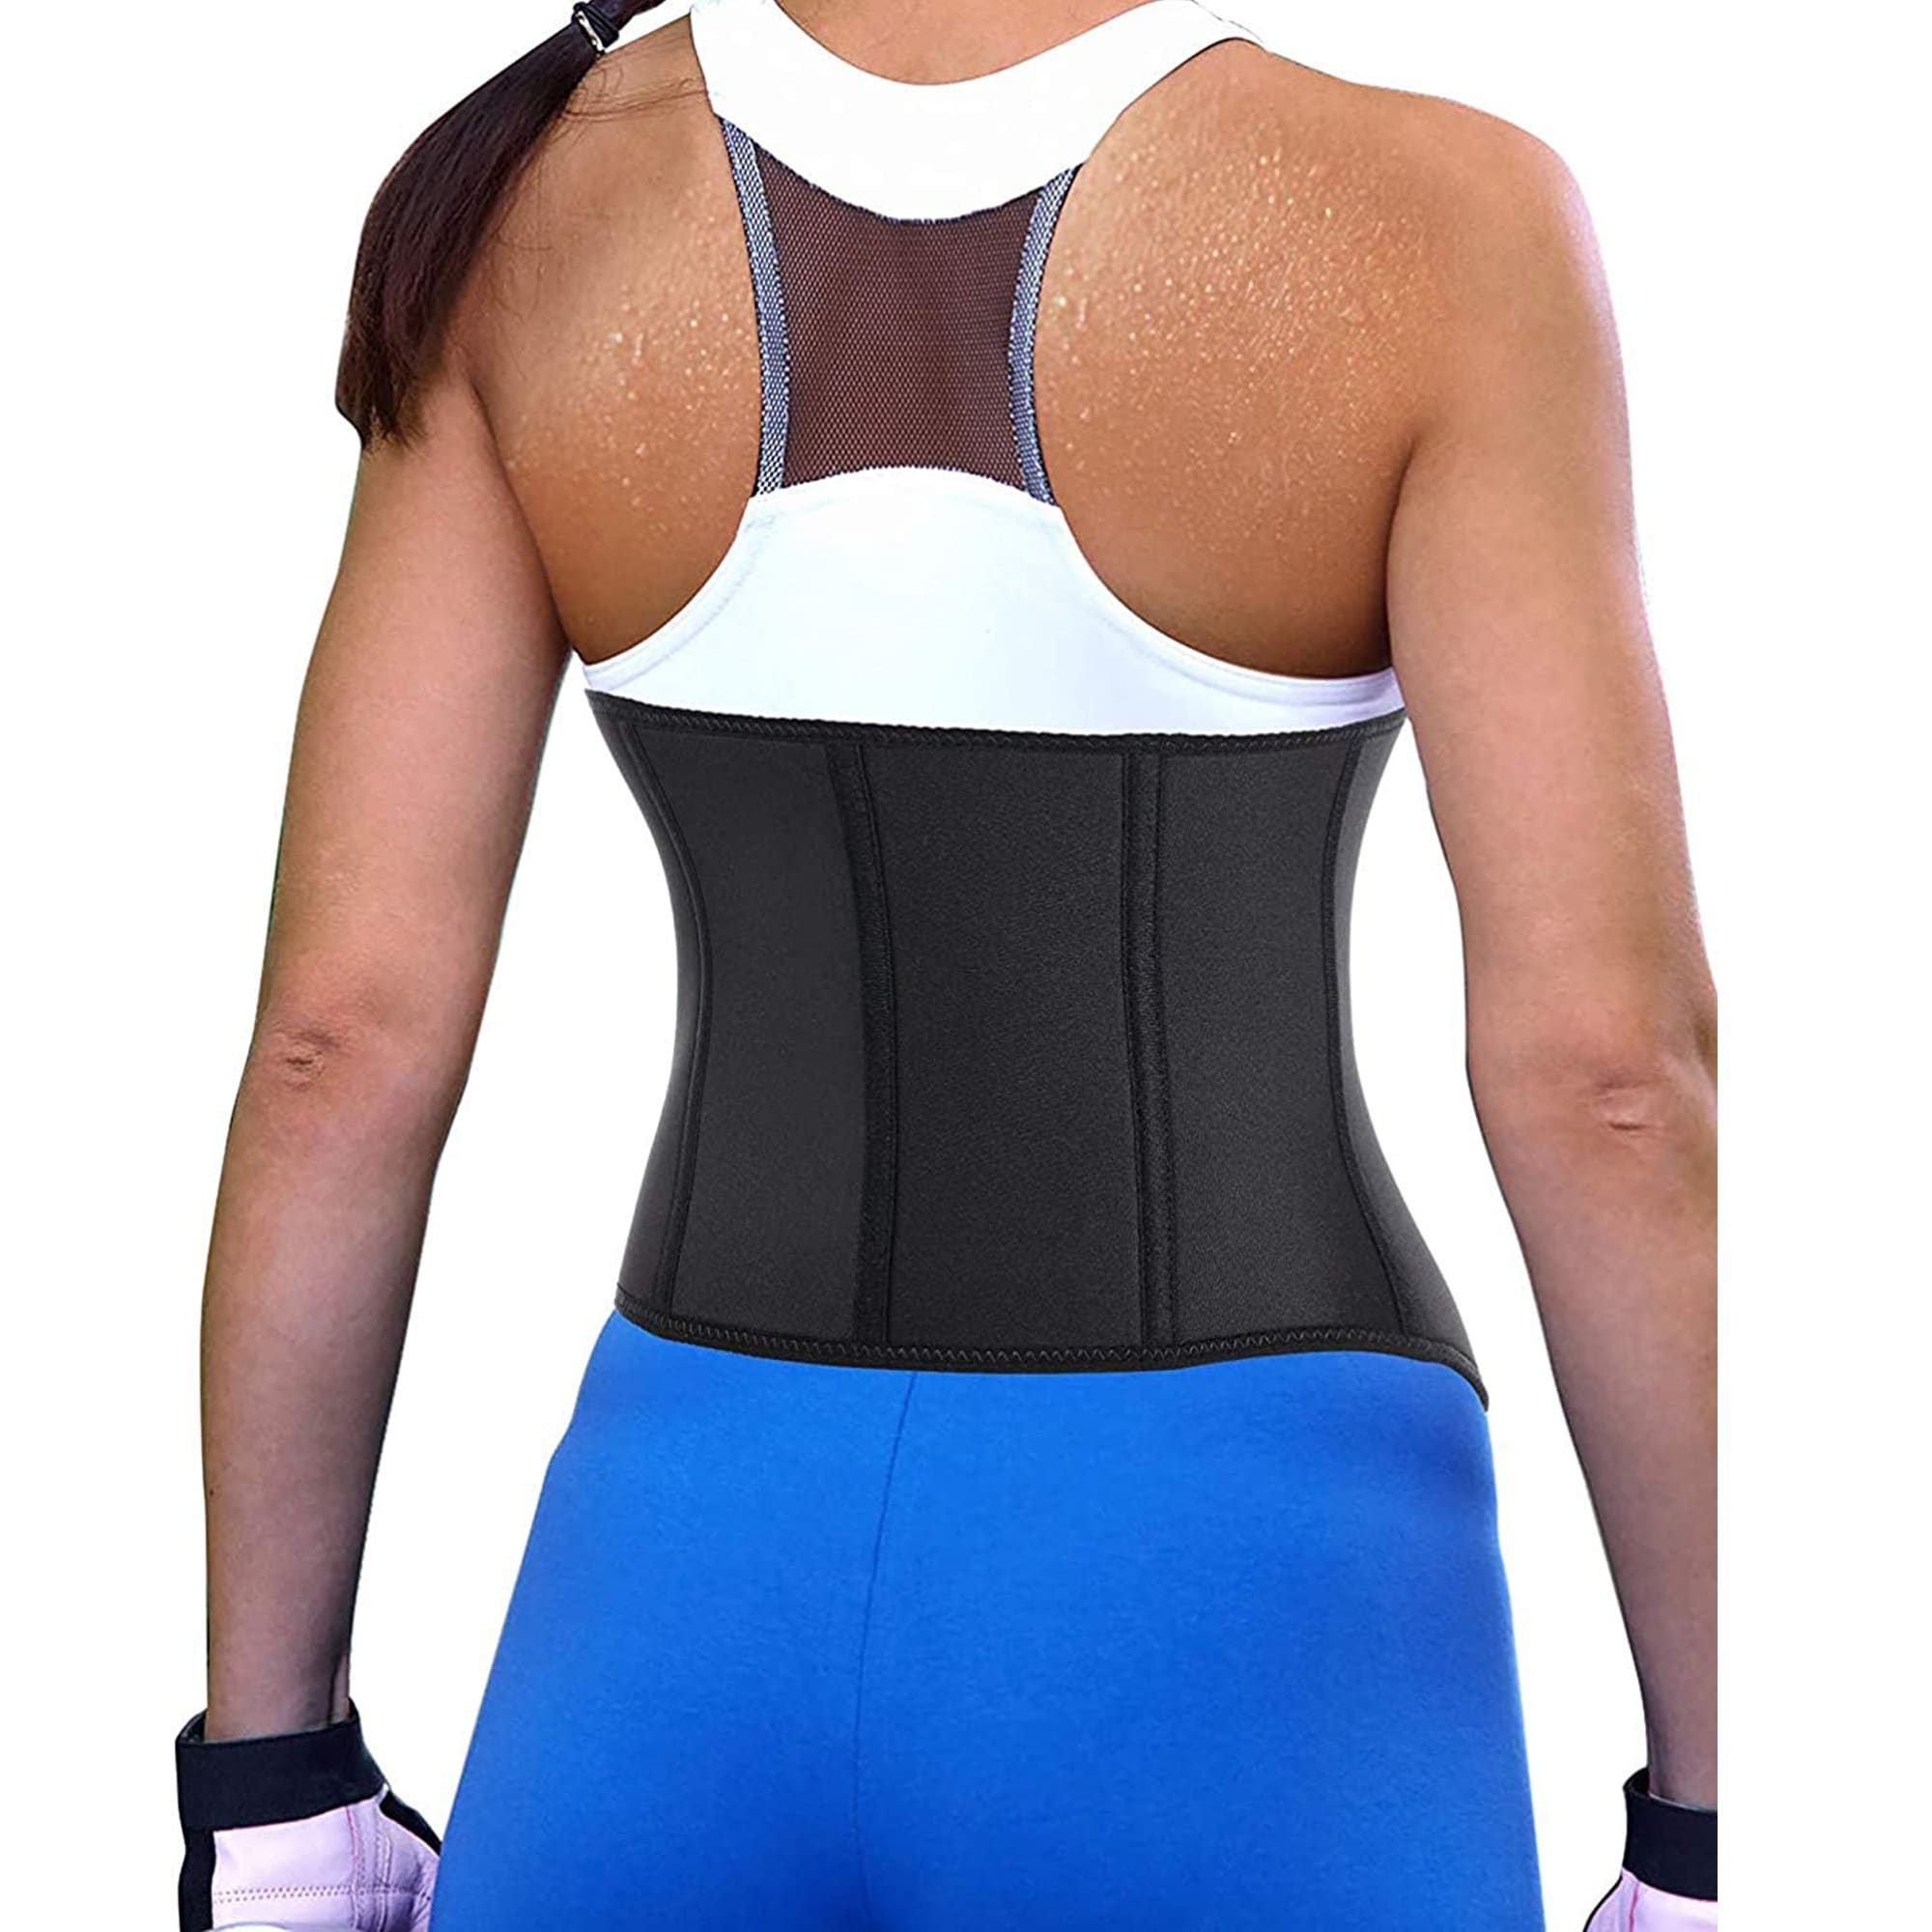 Sweat Waist Trimmer Trainer Belt for Women&Men,Body Wrap Exercise Band Fitness  Workout Sweat Sauna Belt with Pocket for Cellphone. 